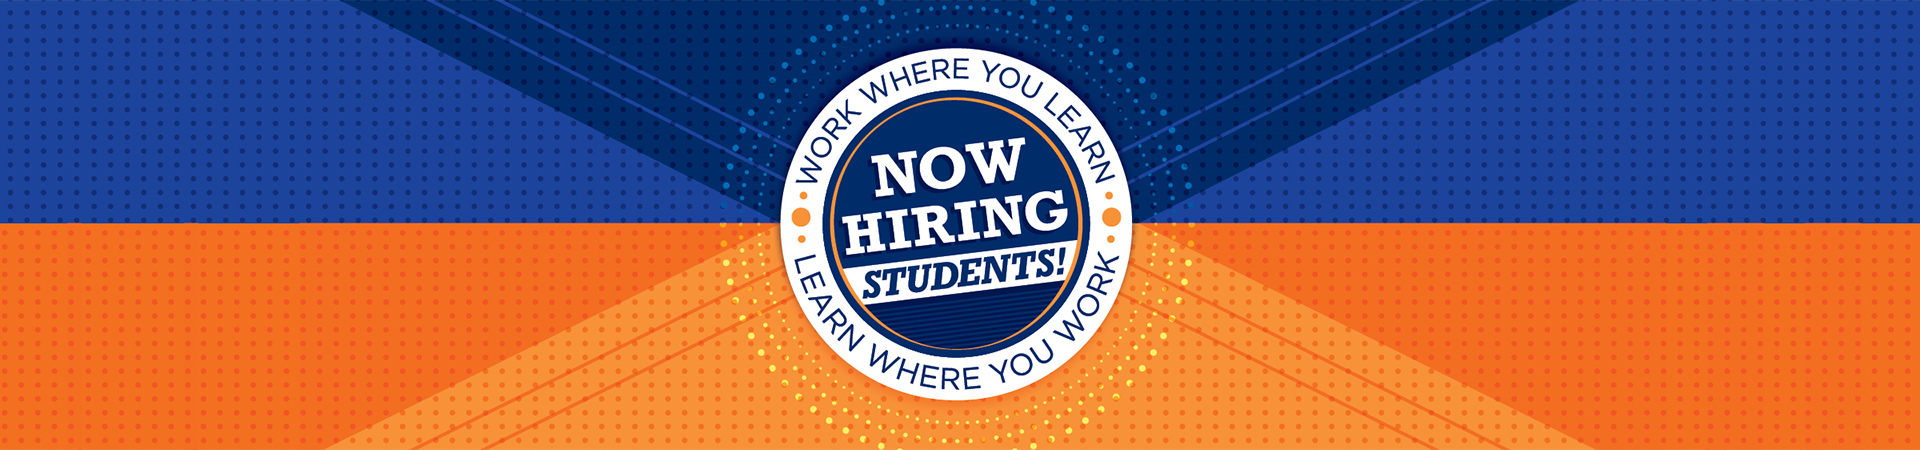 Now Hiring Students: Work where you learn, learn where you work with blue and orange background